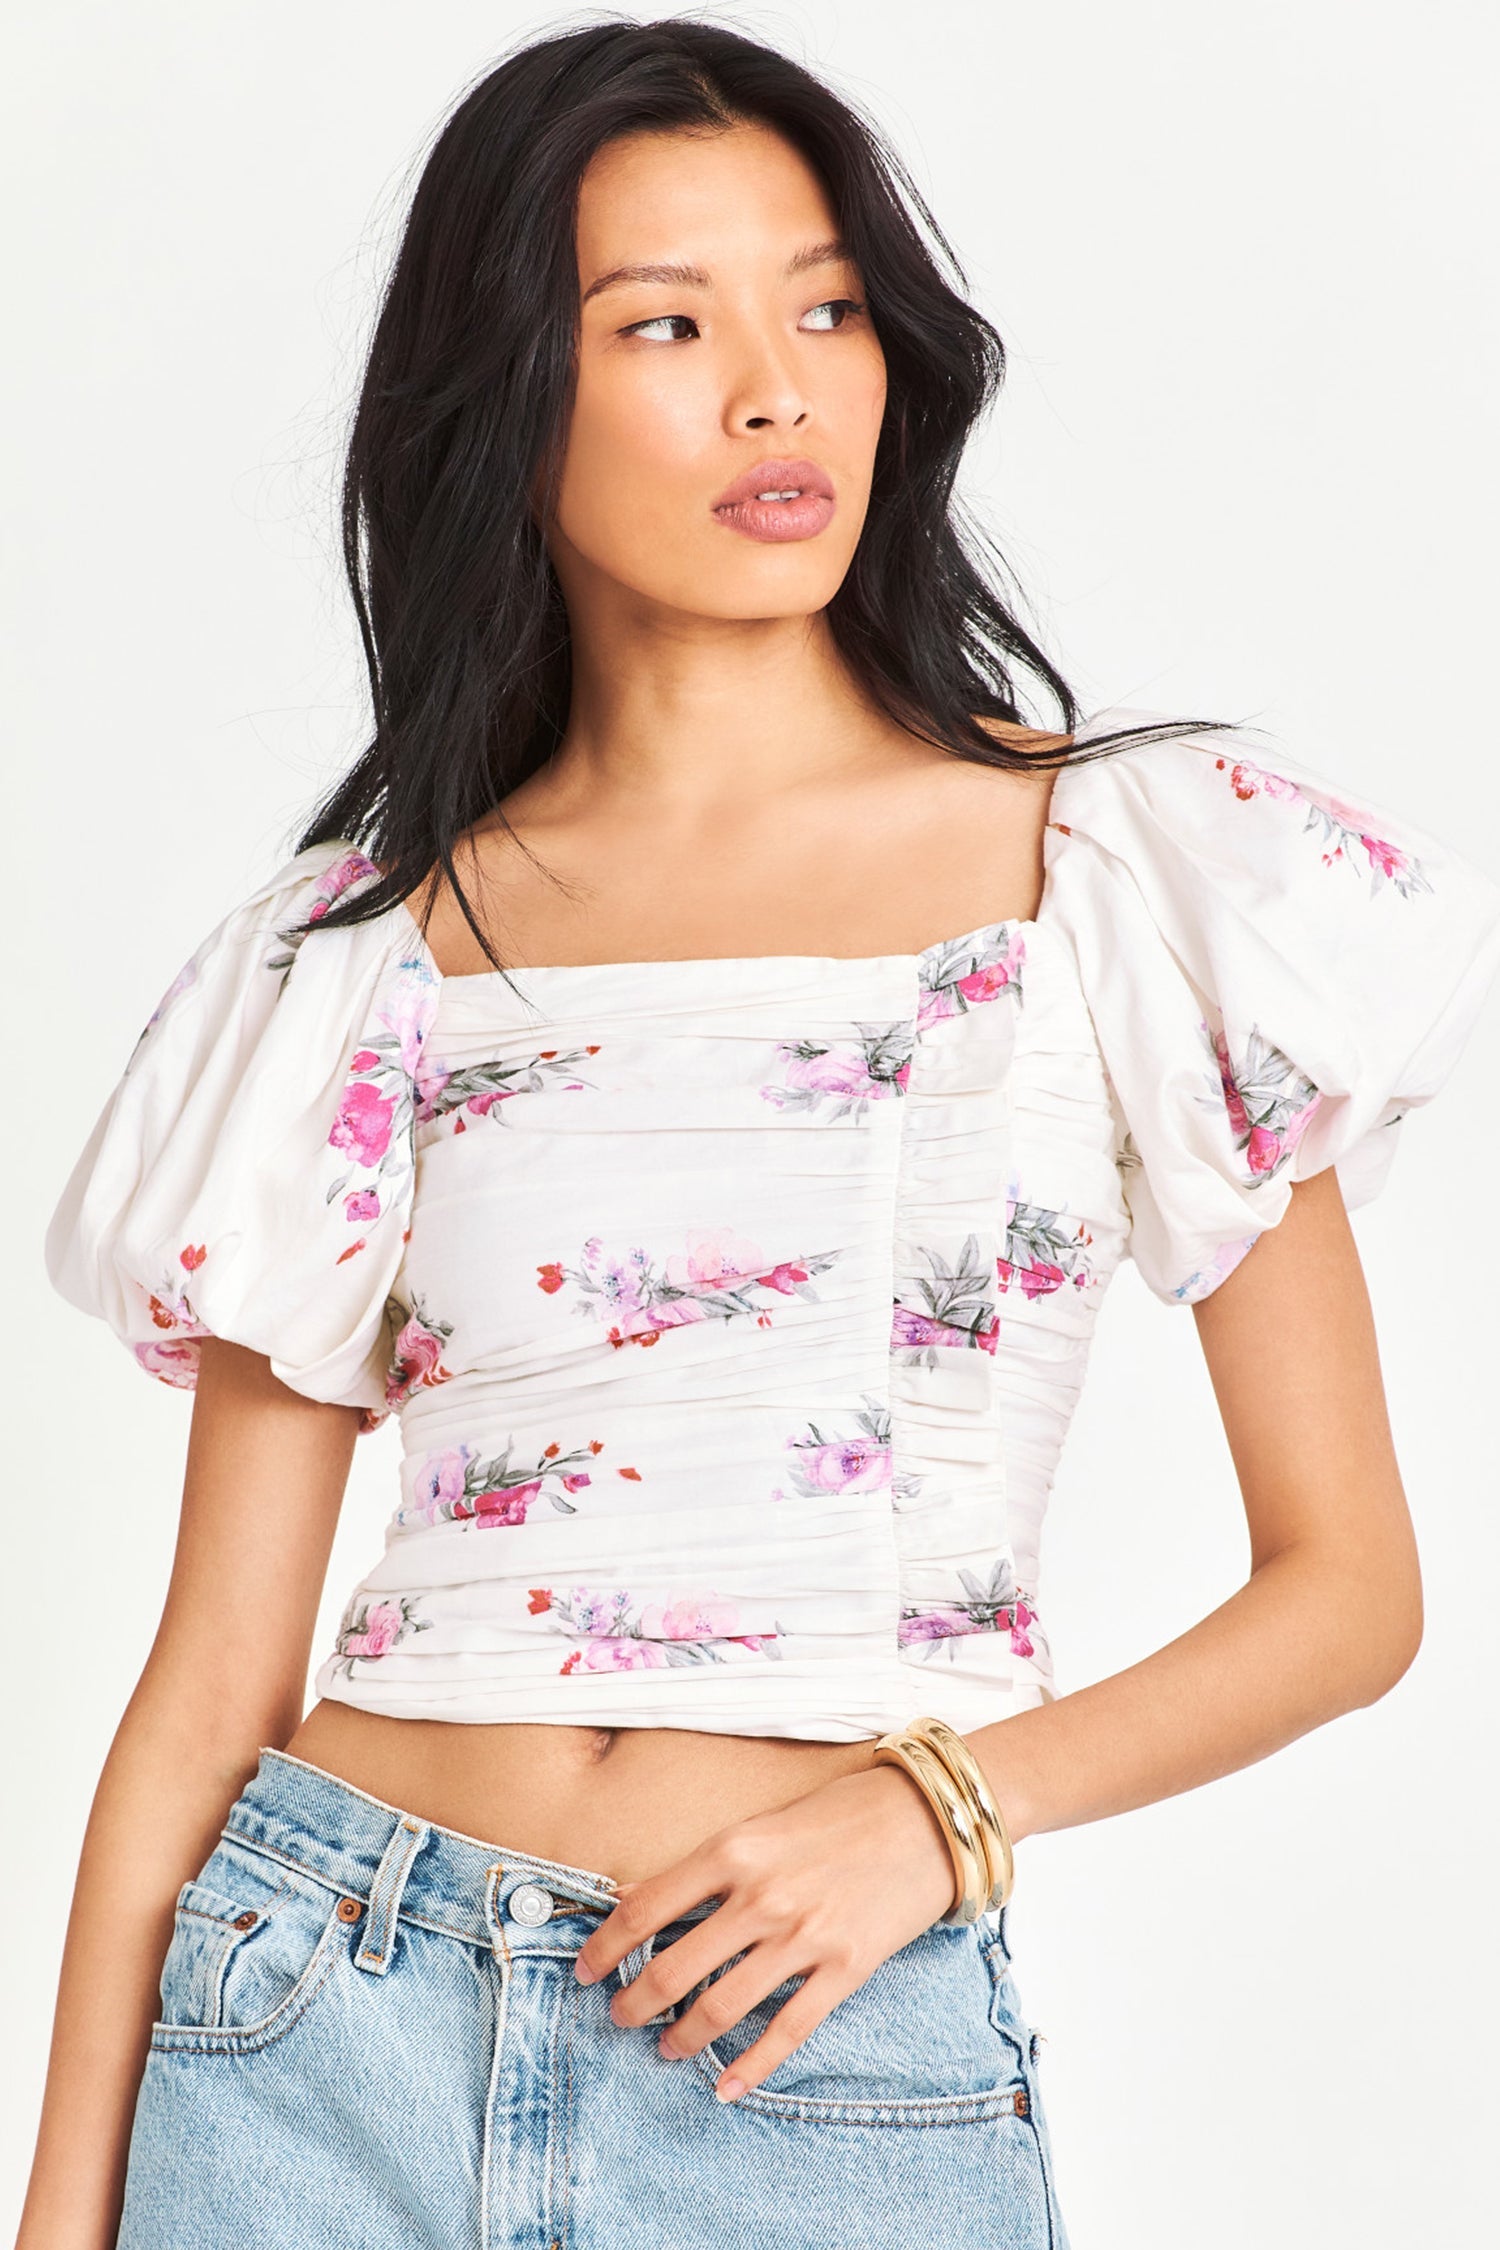 White top with floral design features a smocked bodice with eyelet printed cotton and puff sleeves